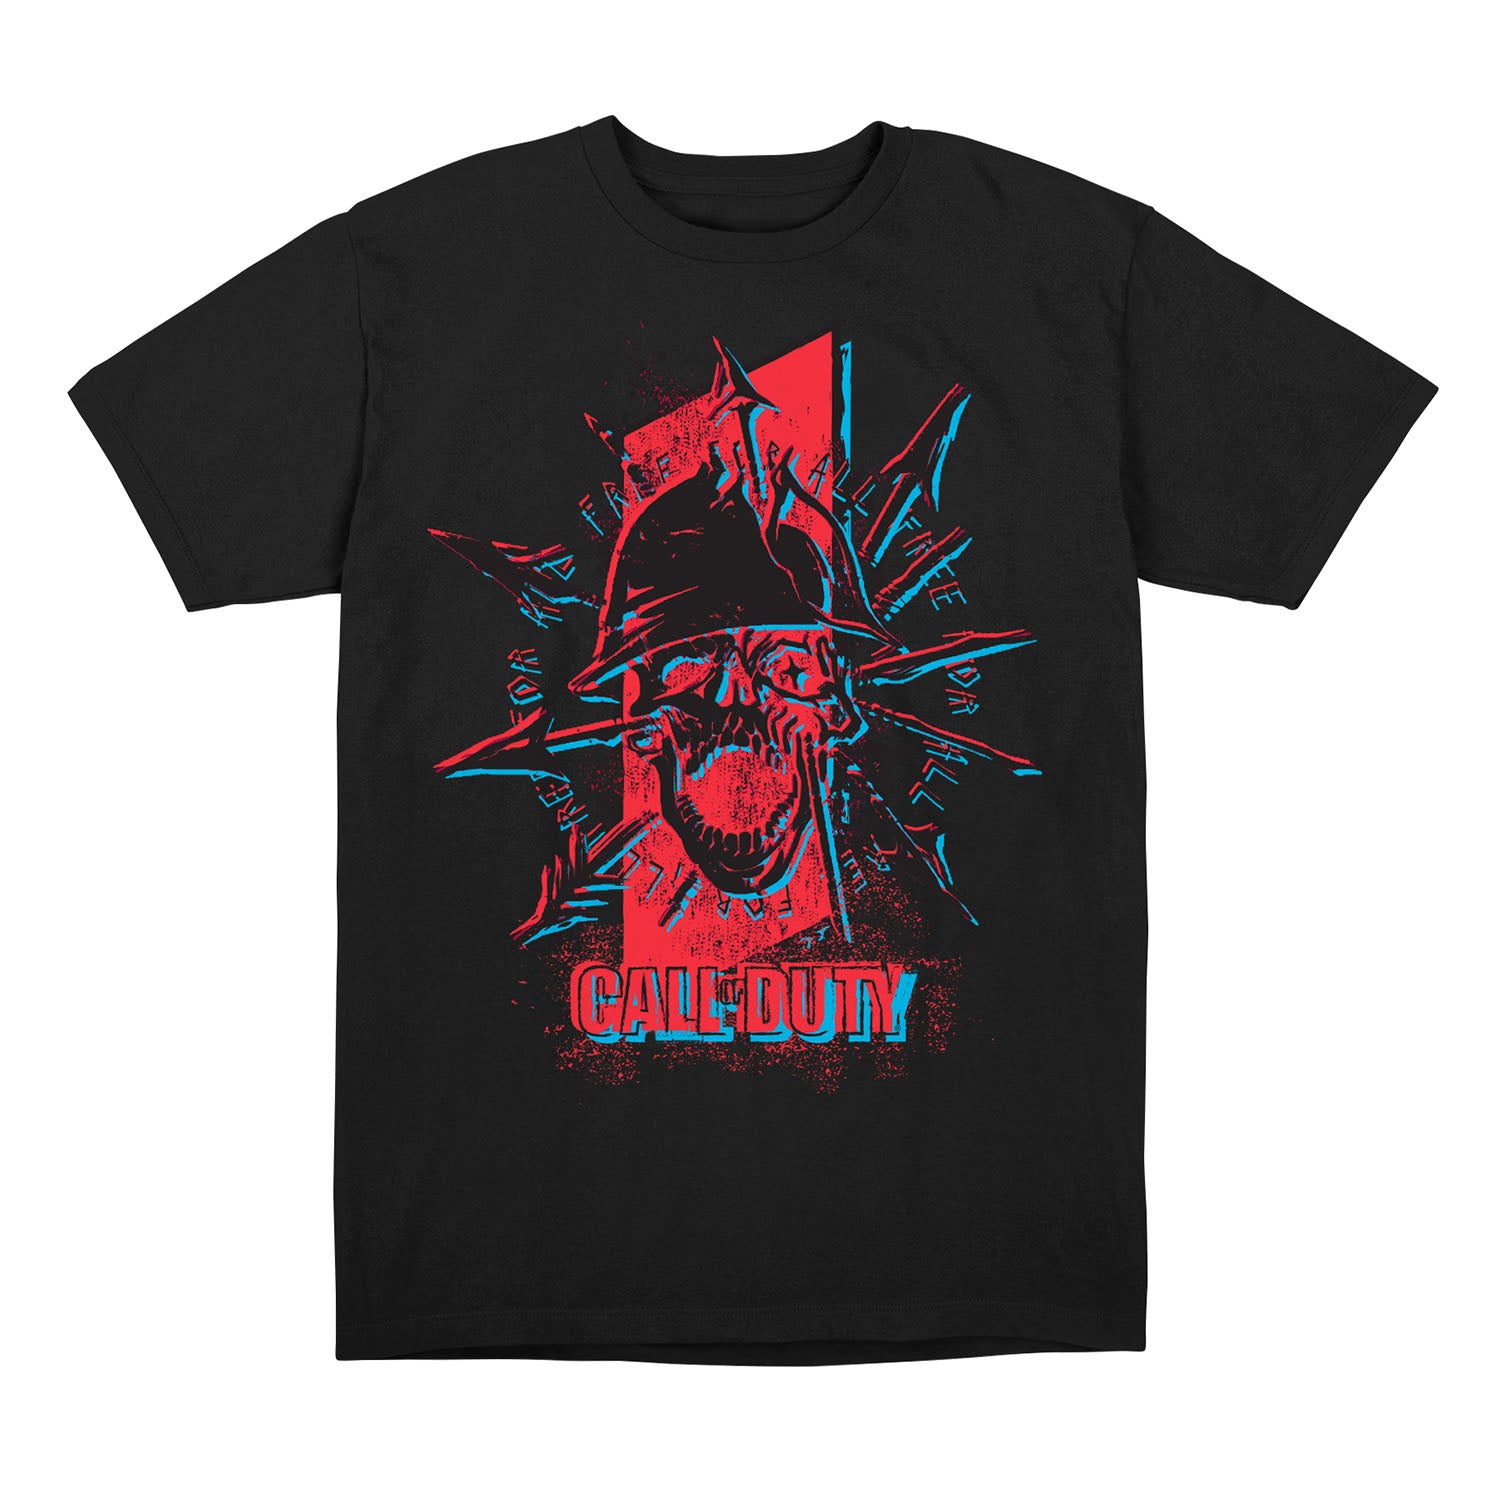 Call of Duty Black Arrows T-Shirt - Front View